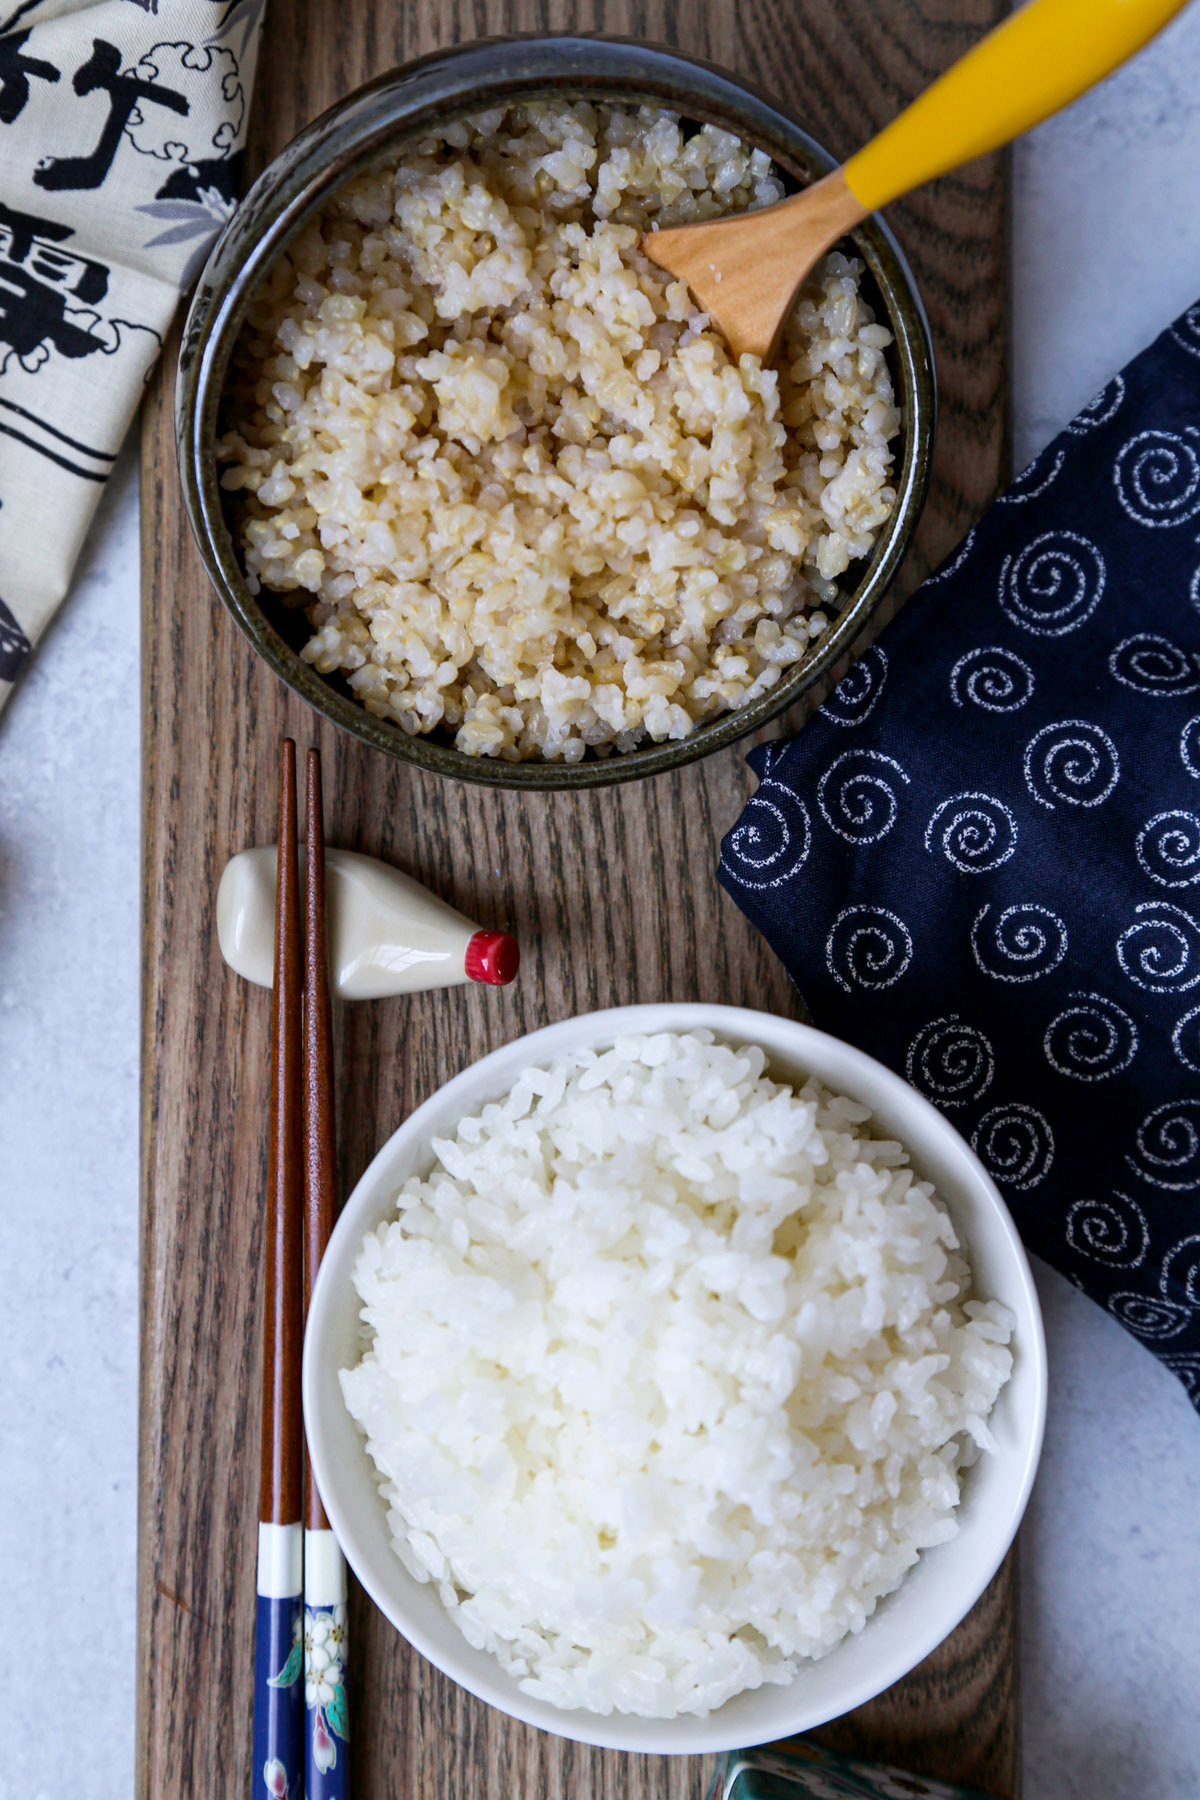 https://pickledplum.com/wp-content/uploads/2023/02/bowl-of-white-rice-and-brown-rice-1200.jpg